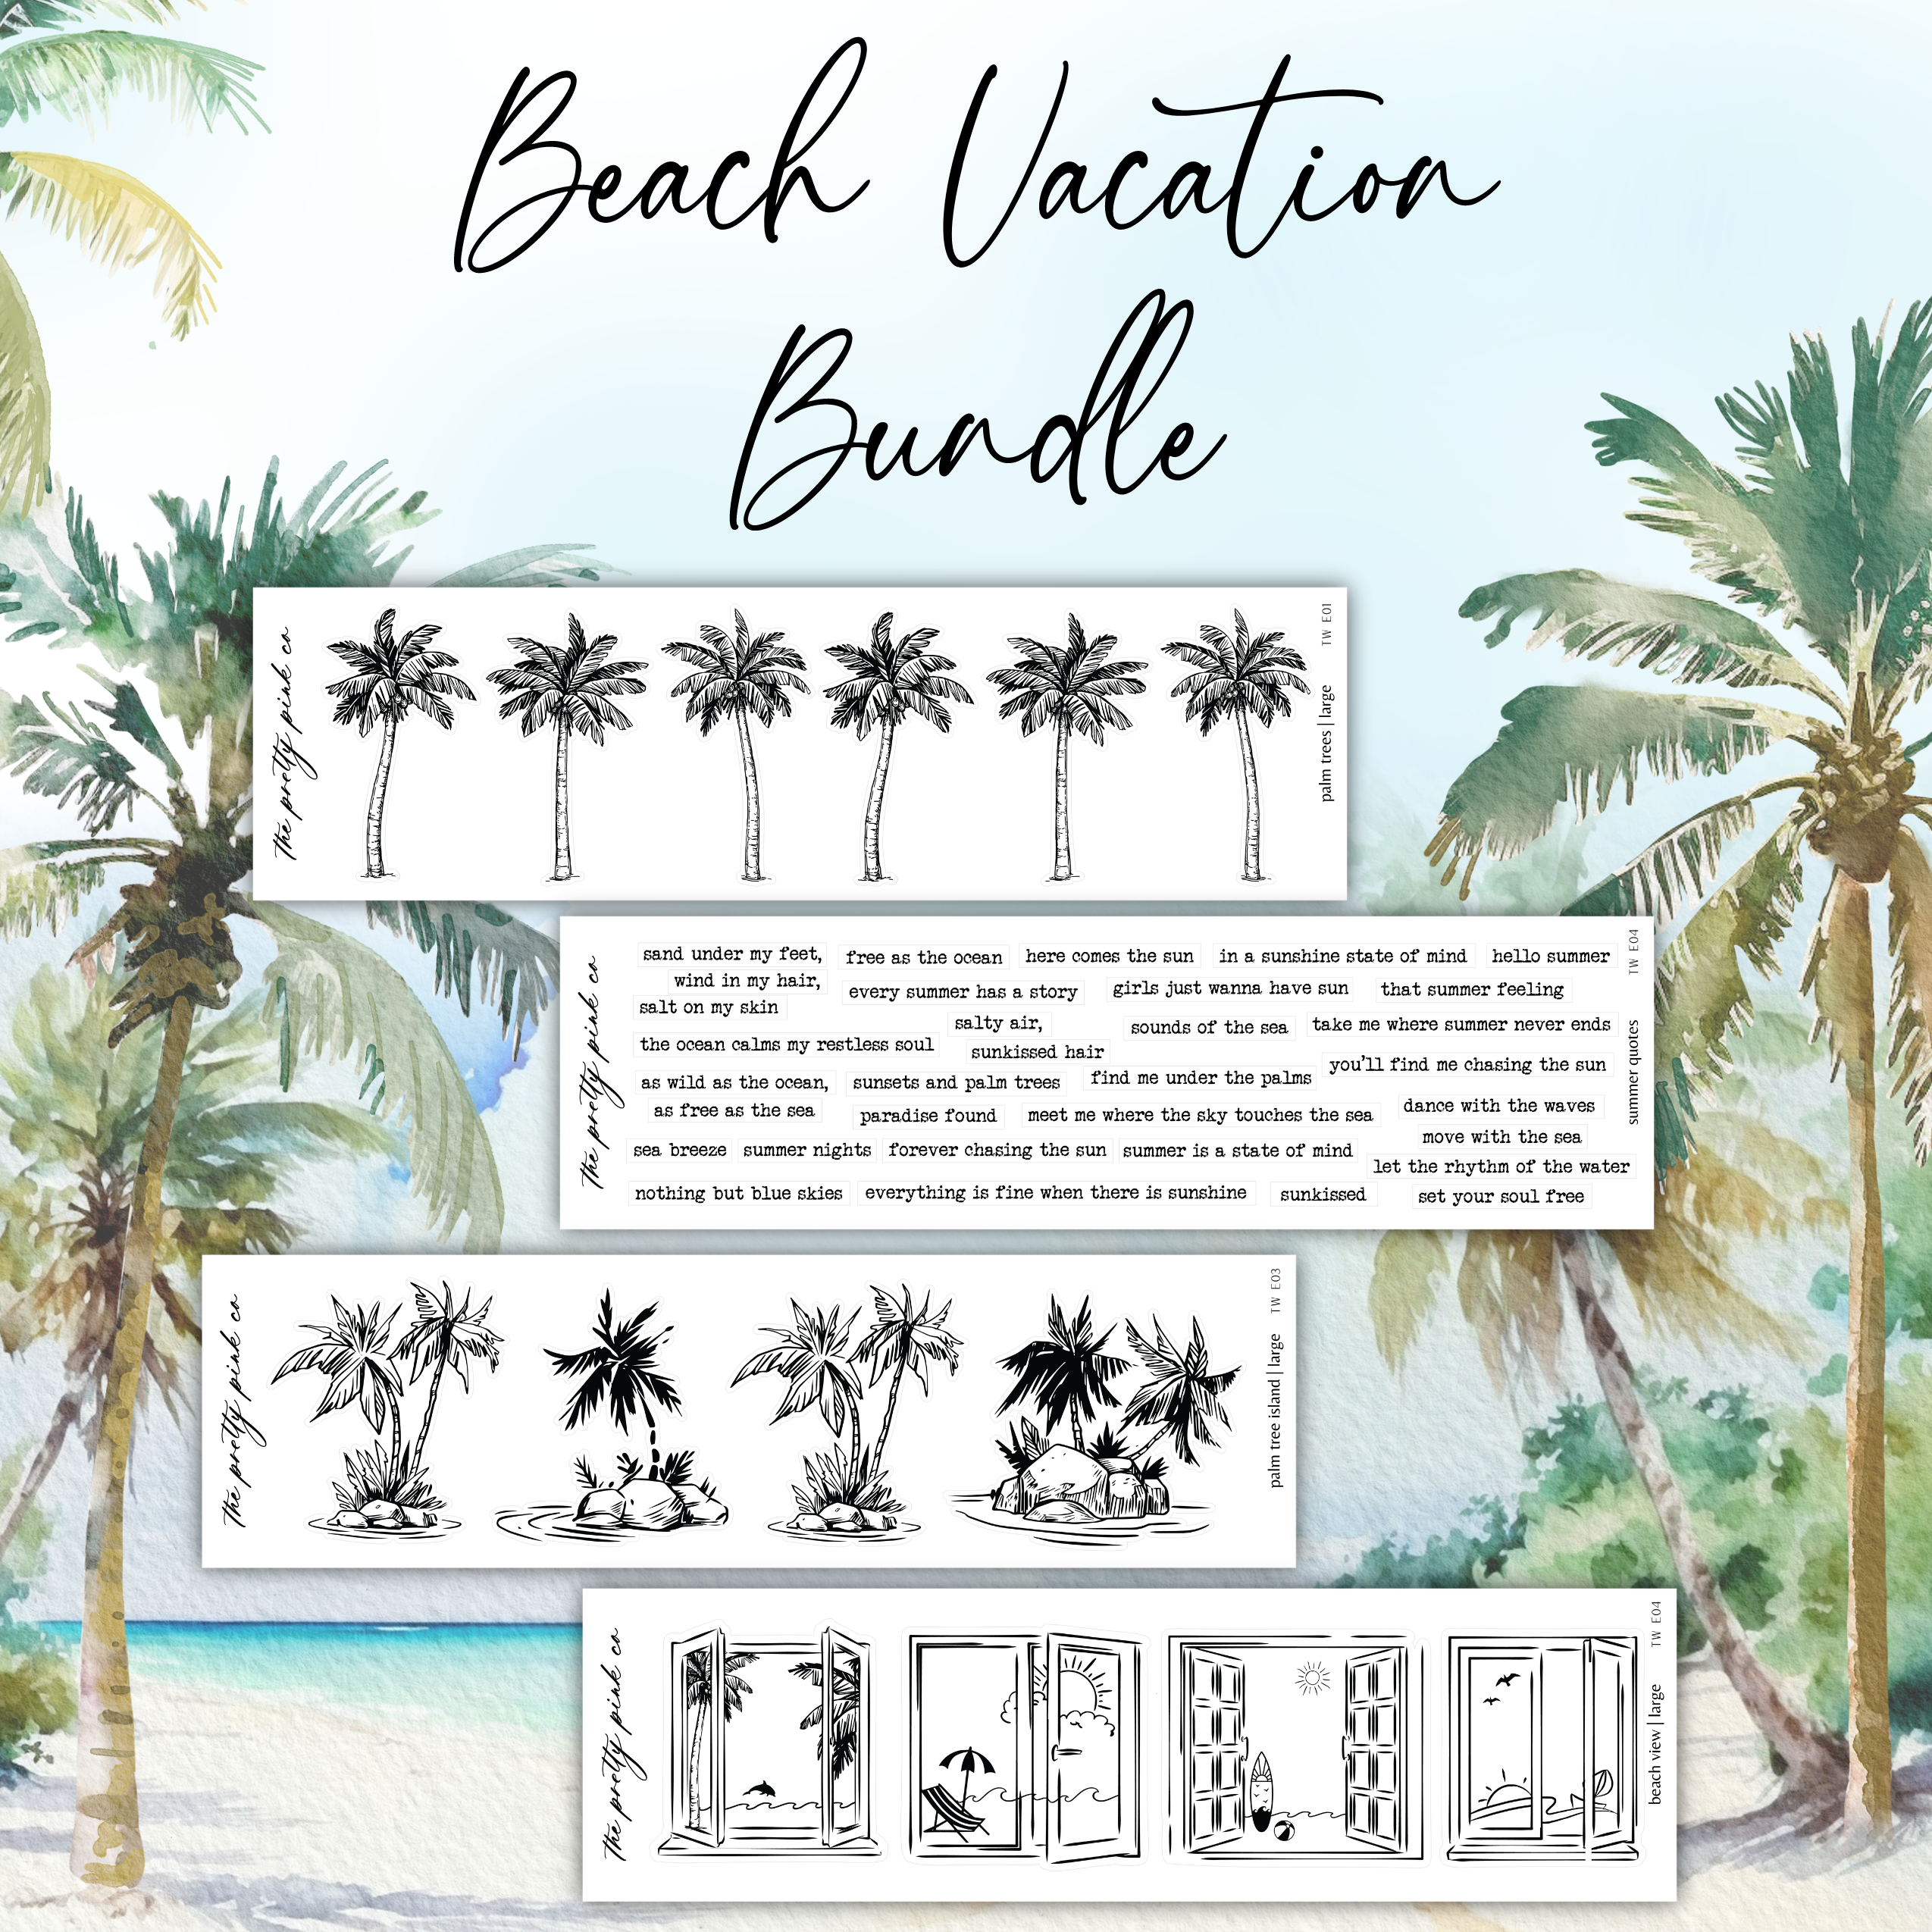 a beach vacation bundle with palm trees